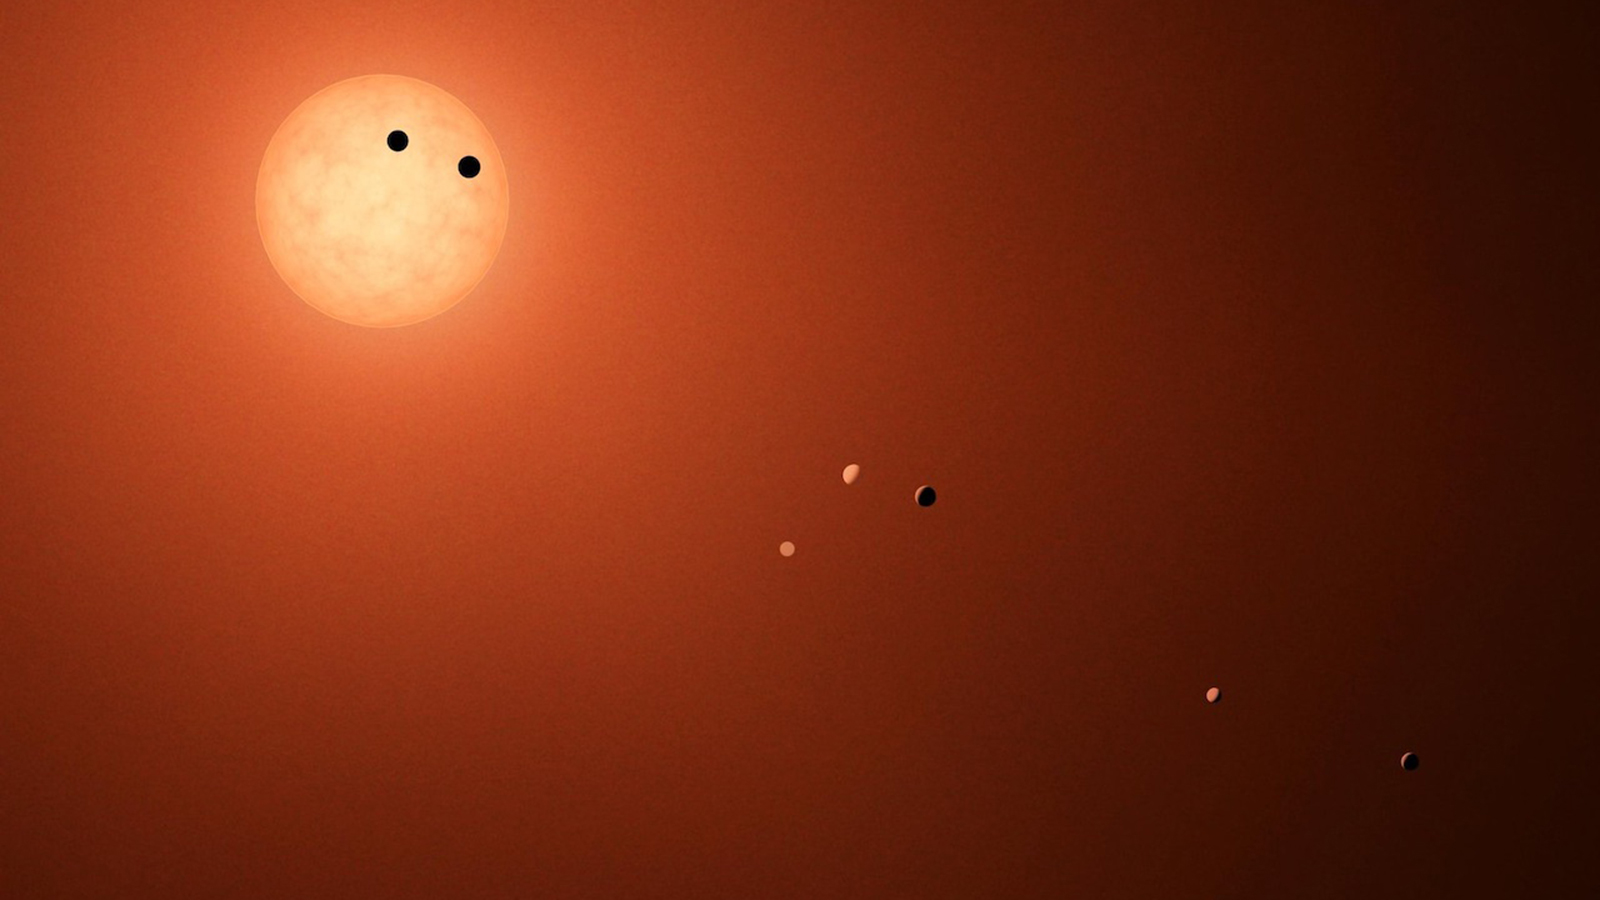 Artist's concept shows the red-dwarf star, TRAPPIST-1, at the upper left, with two large dots on the face of the disk representing transiting planets; five more planets are shown at varying positions descending toward the lower right as they orbit the star. Artist's concept shows the TRAPPIST-1 planets as they might be seen from Earth using an extremely powerful – and fictional – telescope. Credit: NASA/JPL-Caltech